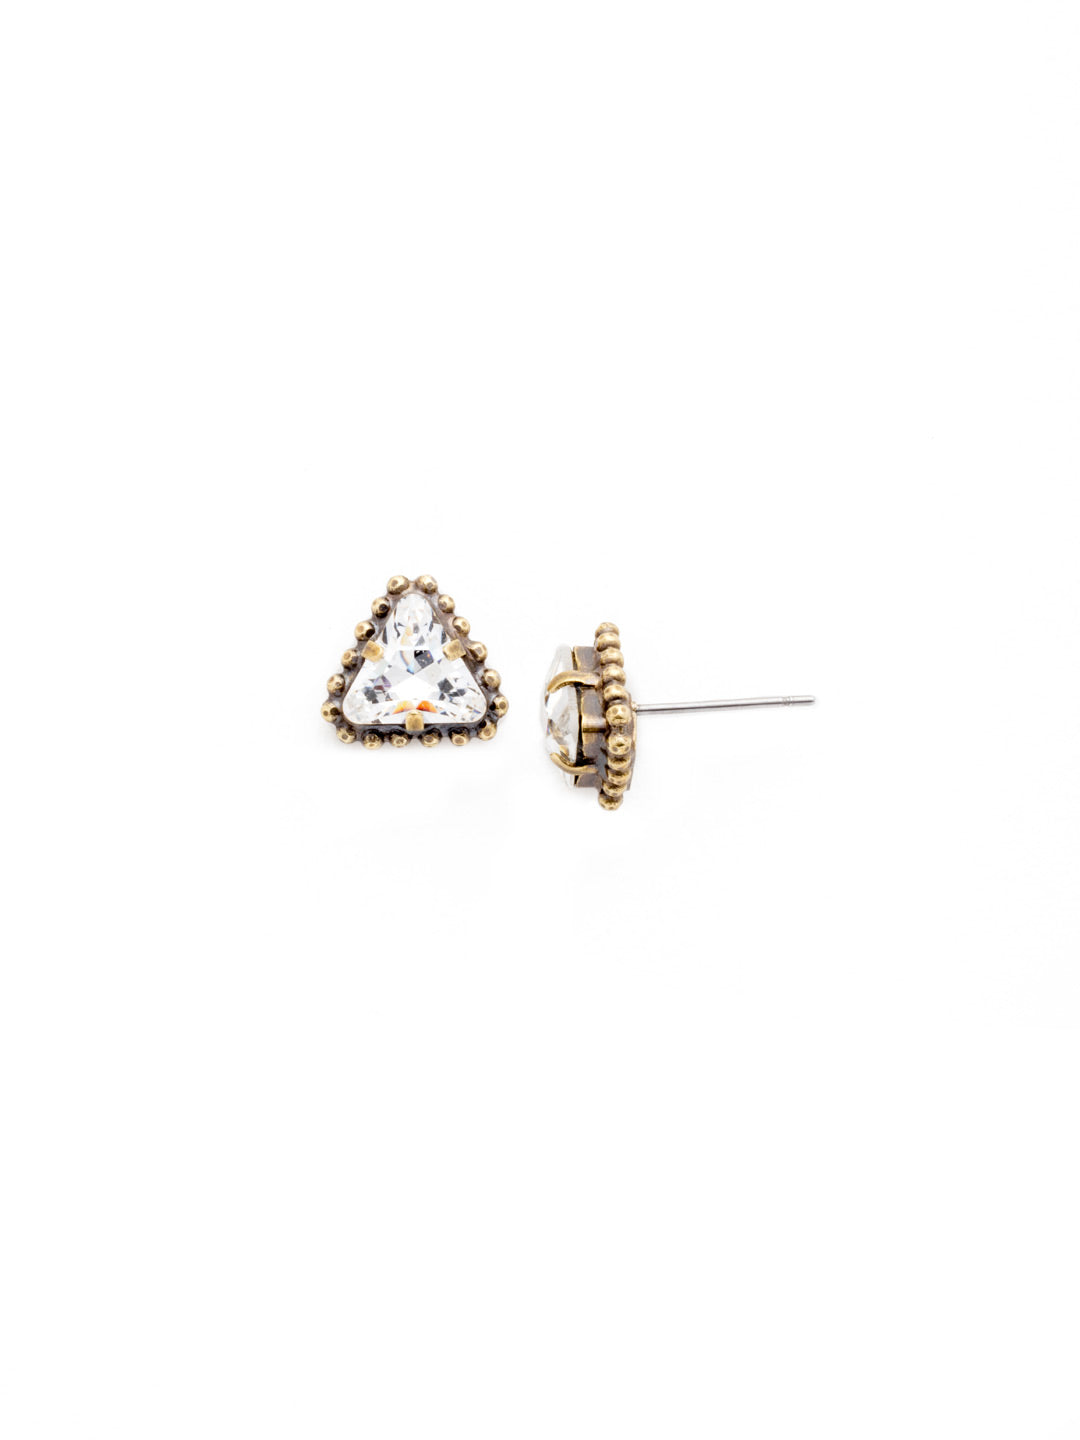 Embellished Triangle Post Earring - EDH39AGPLU - Our Embellished Triangle Post Earring features a triangle crystal embellished with decorative edging. These are the perfect addition to any outfit!